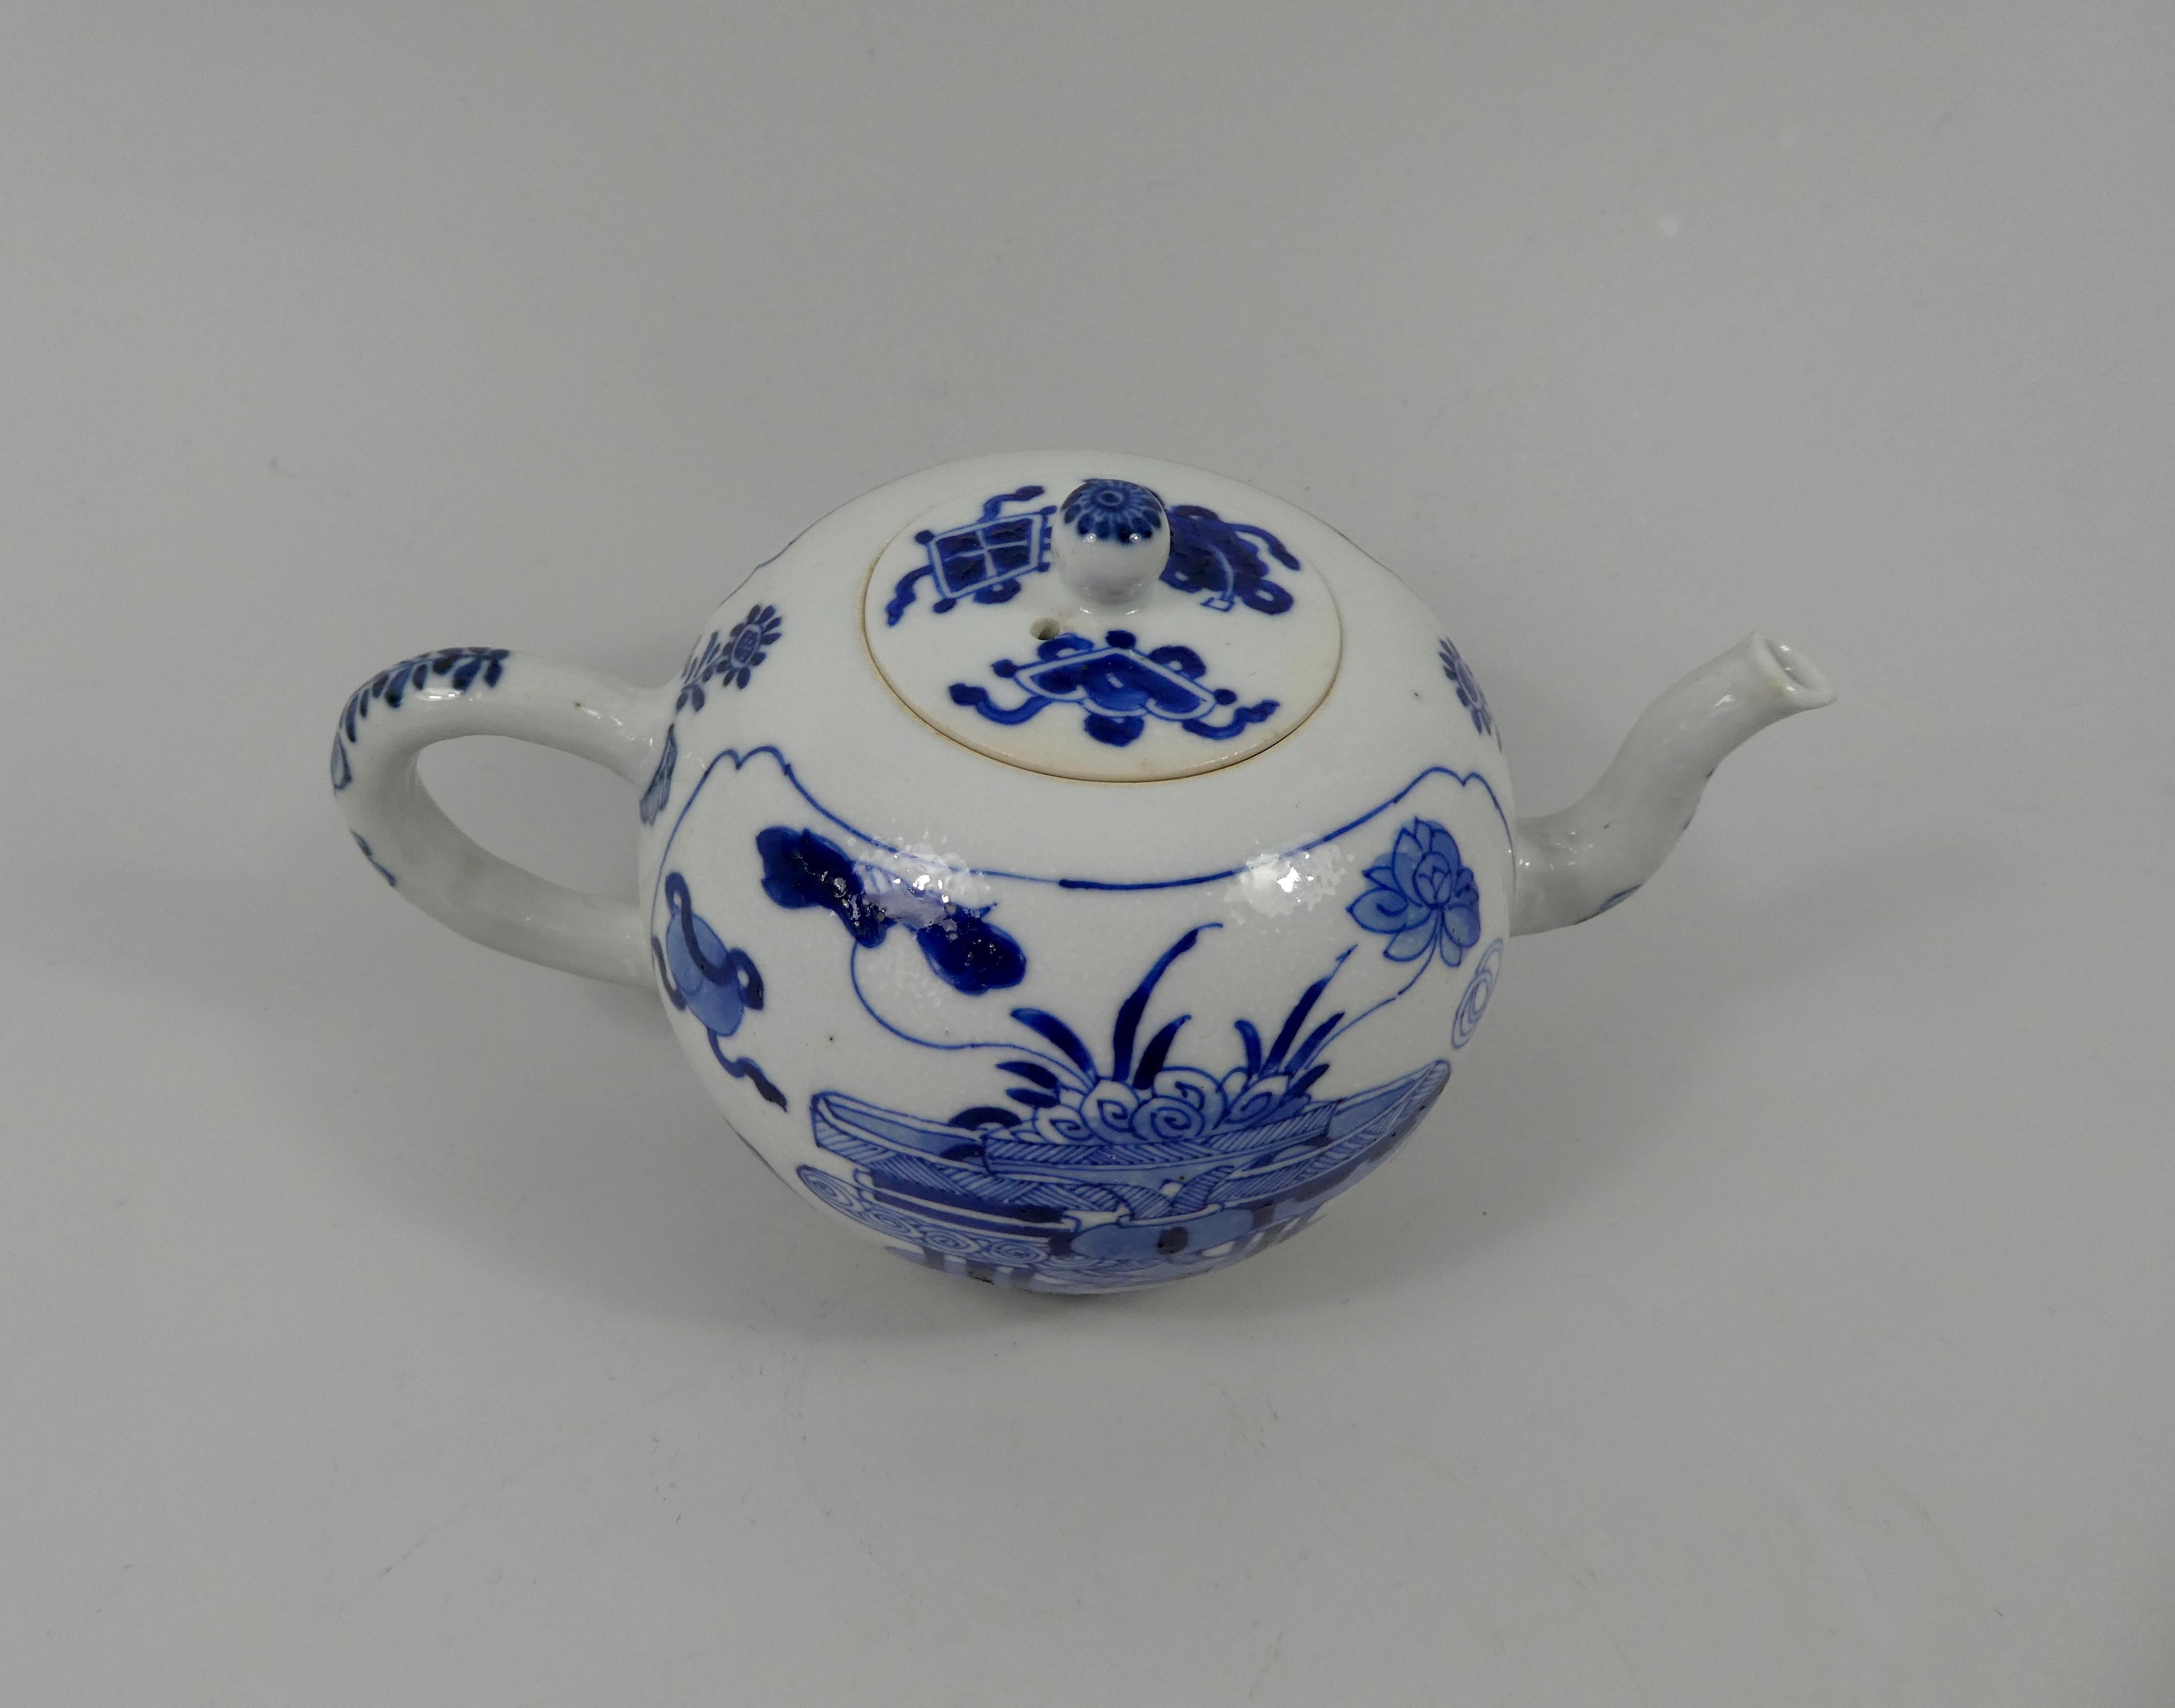 Other Chinese Porcelain Teapot, Precious Objects, Kangxi Period, circa 1700